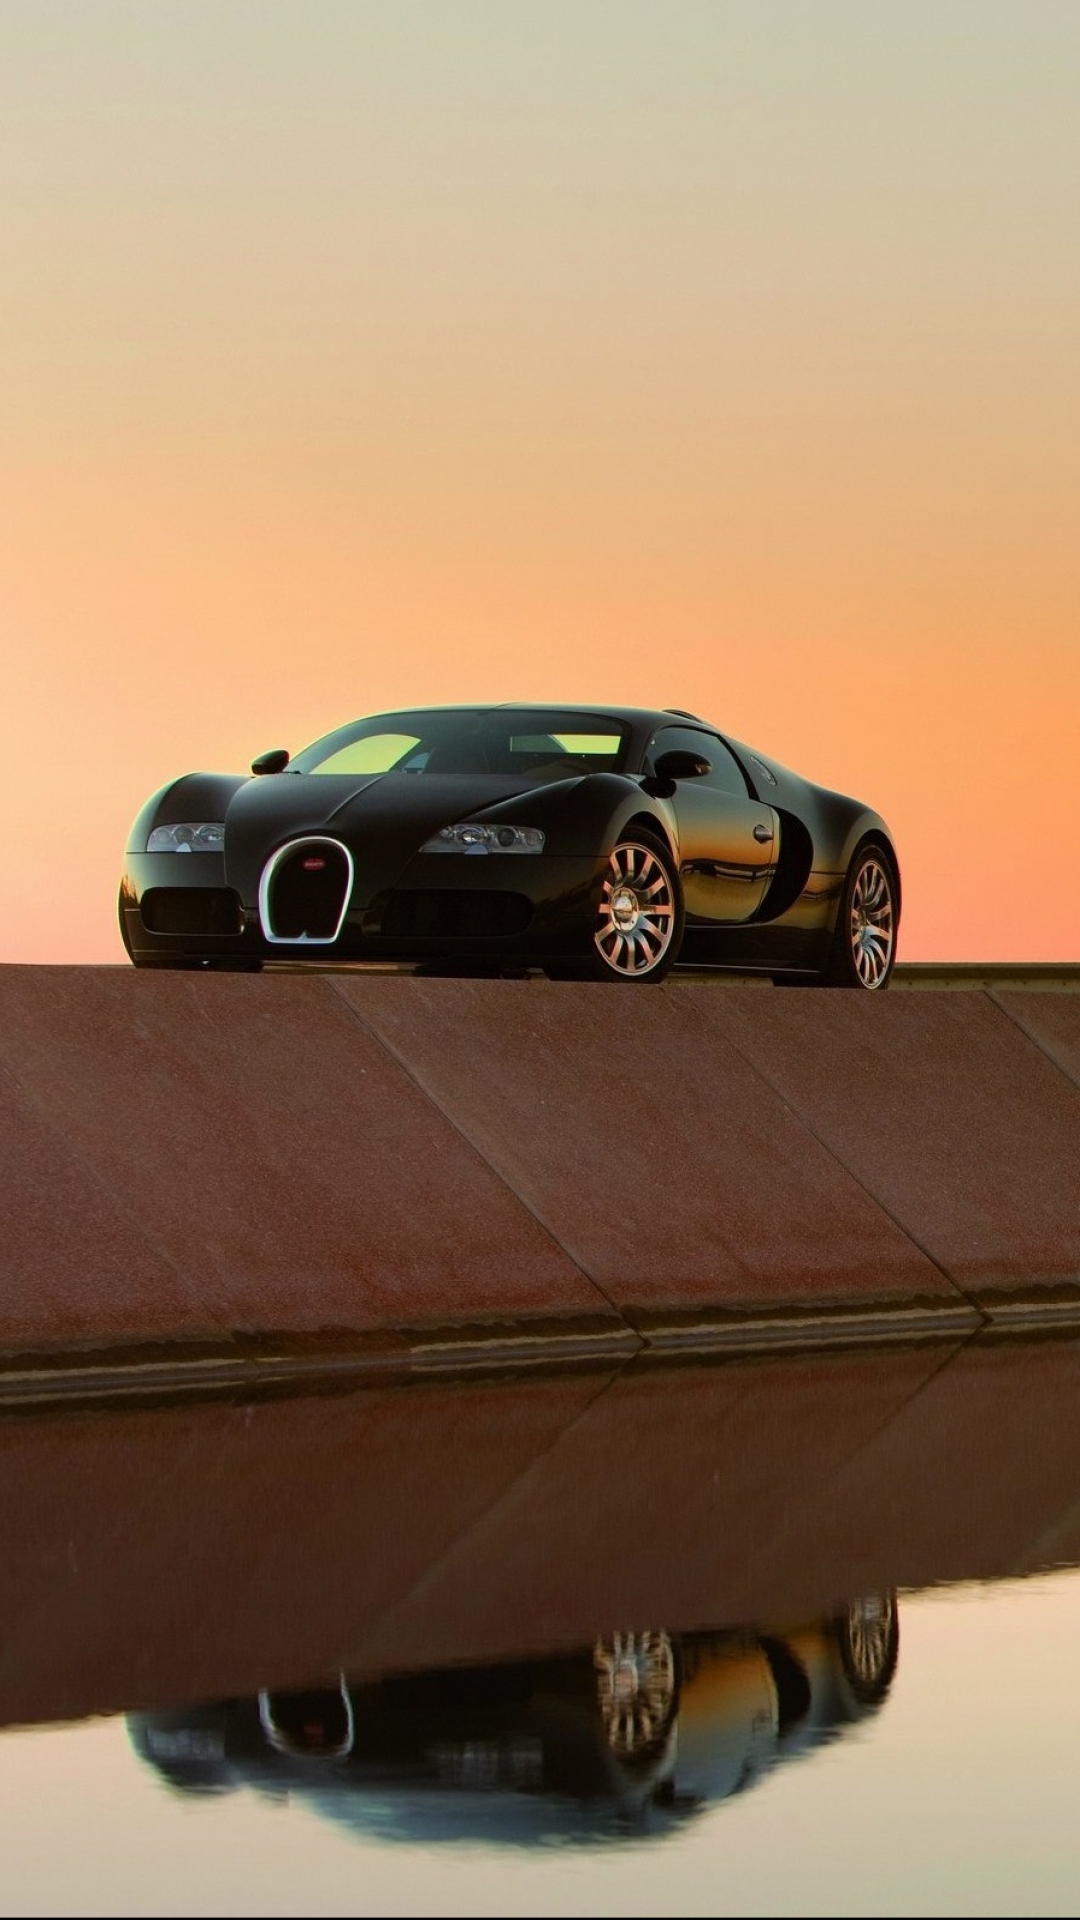 59 Bugatti Wallpapers HD 4K 5K for PC and Mobile  Download free images  for iPhone Android